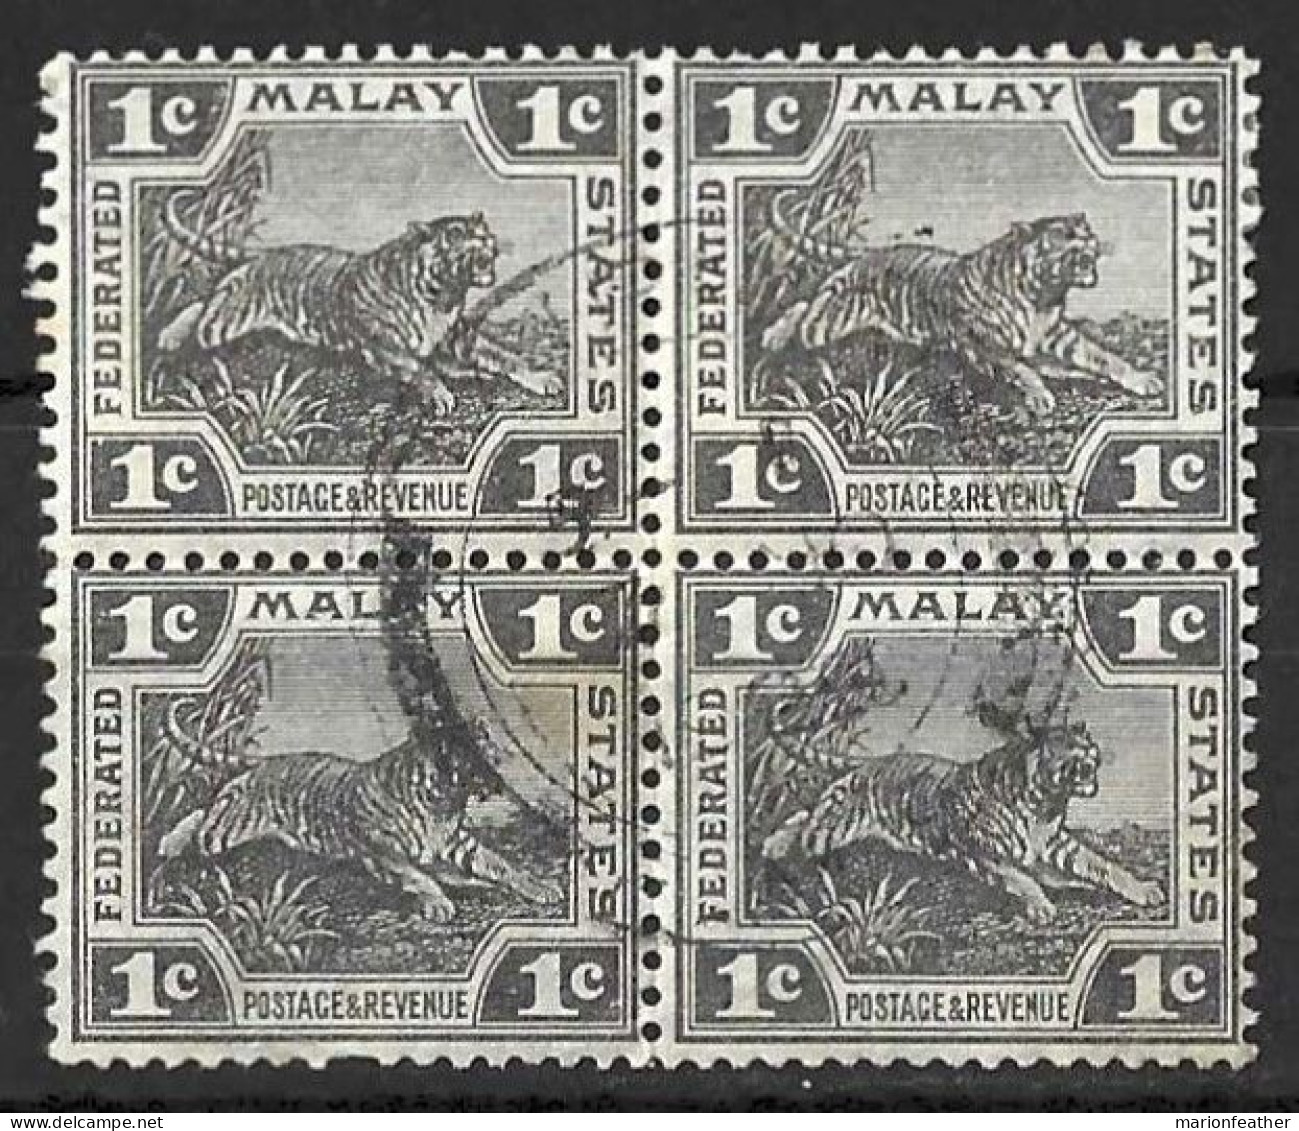 MALAYA.."  F.M.S. "...KING GEORGE..V..(1910-36..)..." 1922.."...TIGER......1c...X BLOCK OF 4.....SG53.......CDS....USED. - Federated Malay States